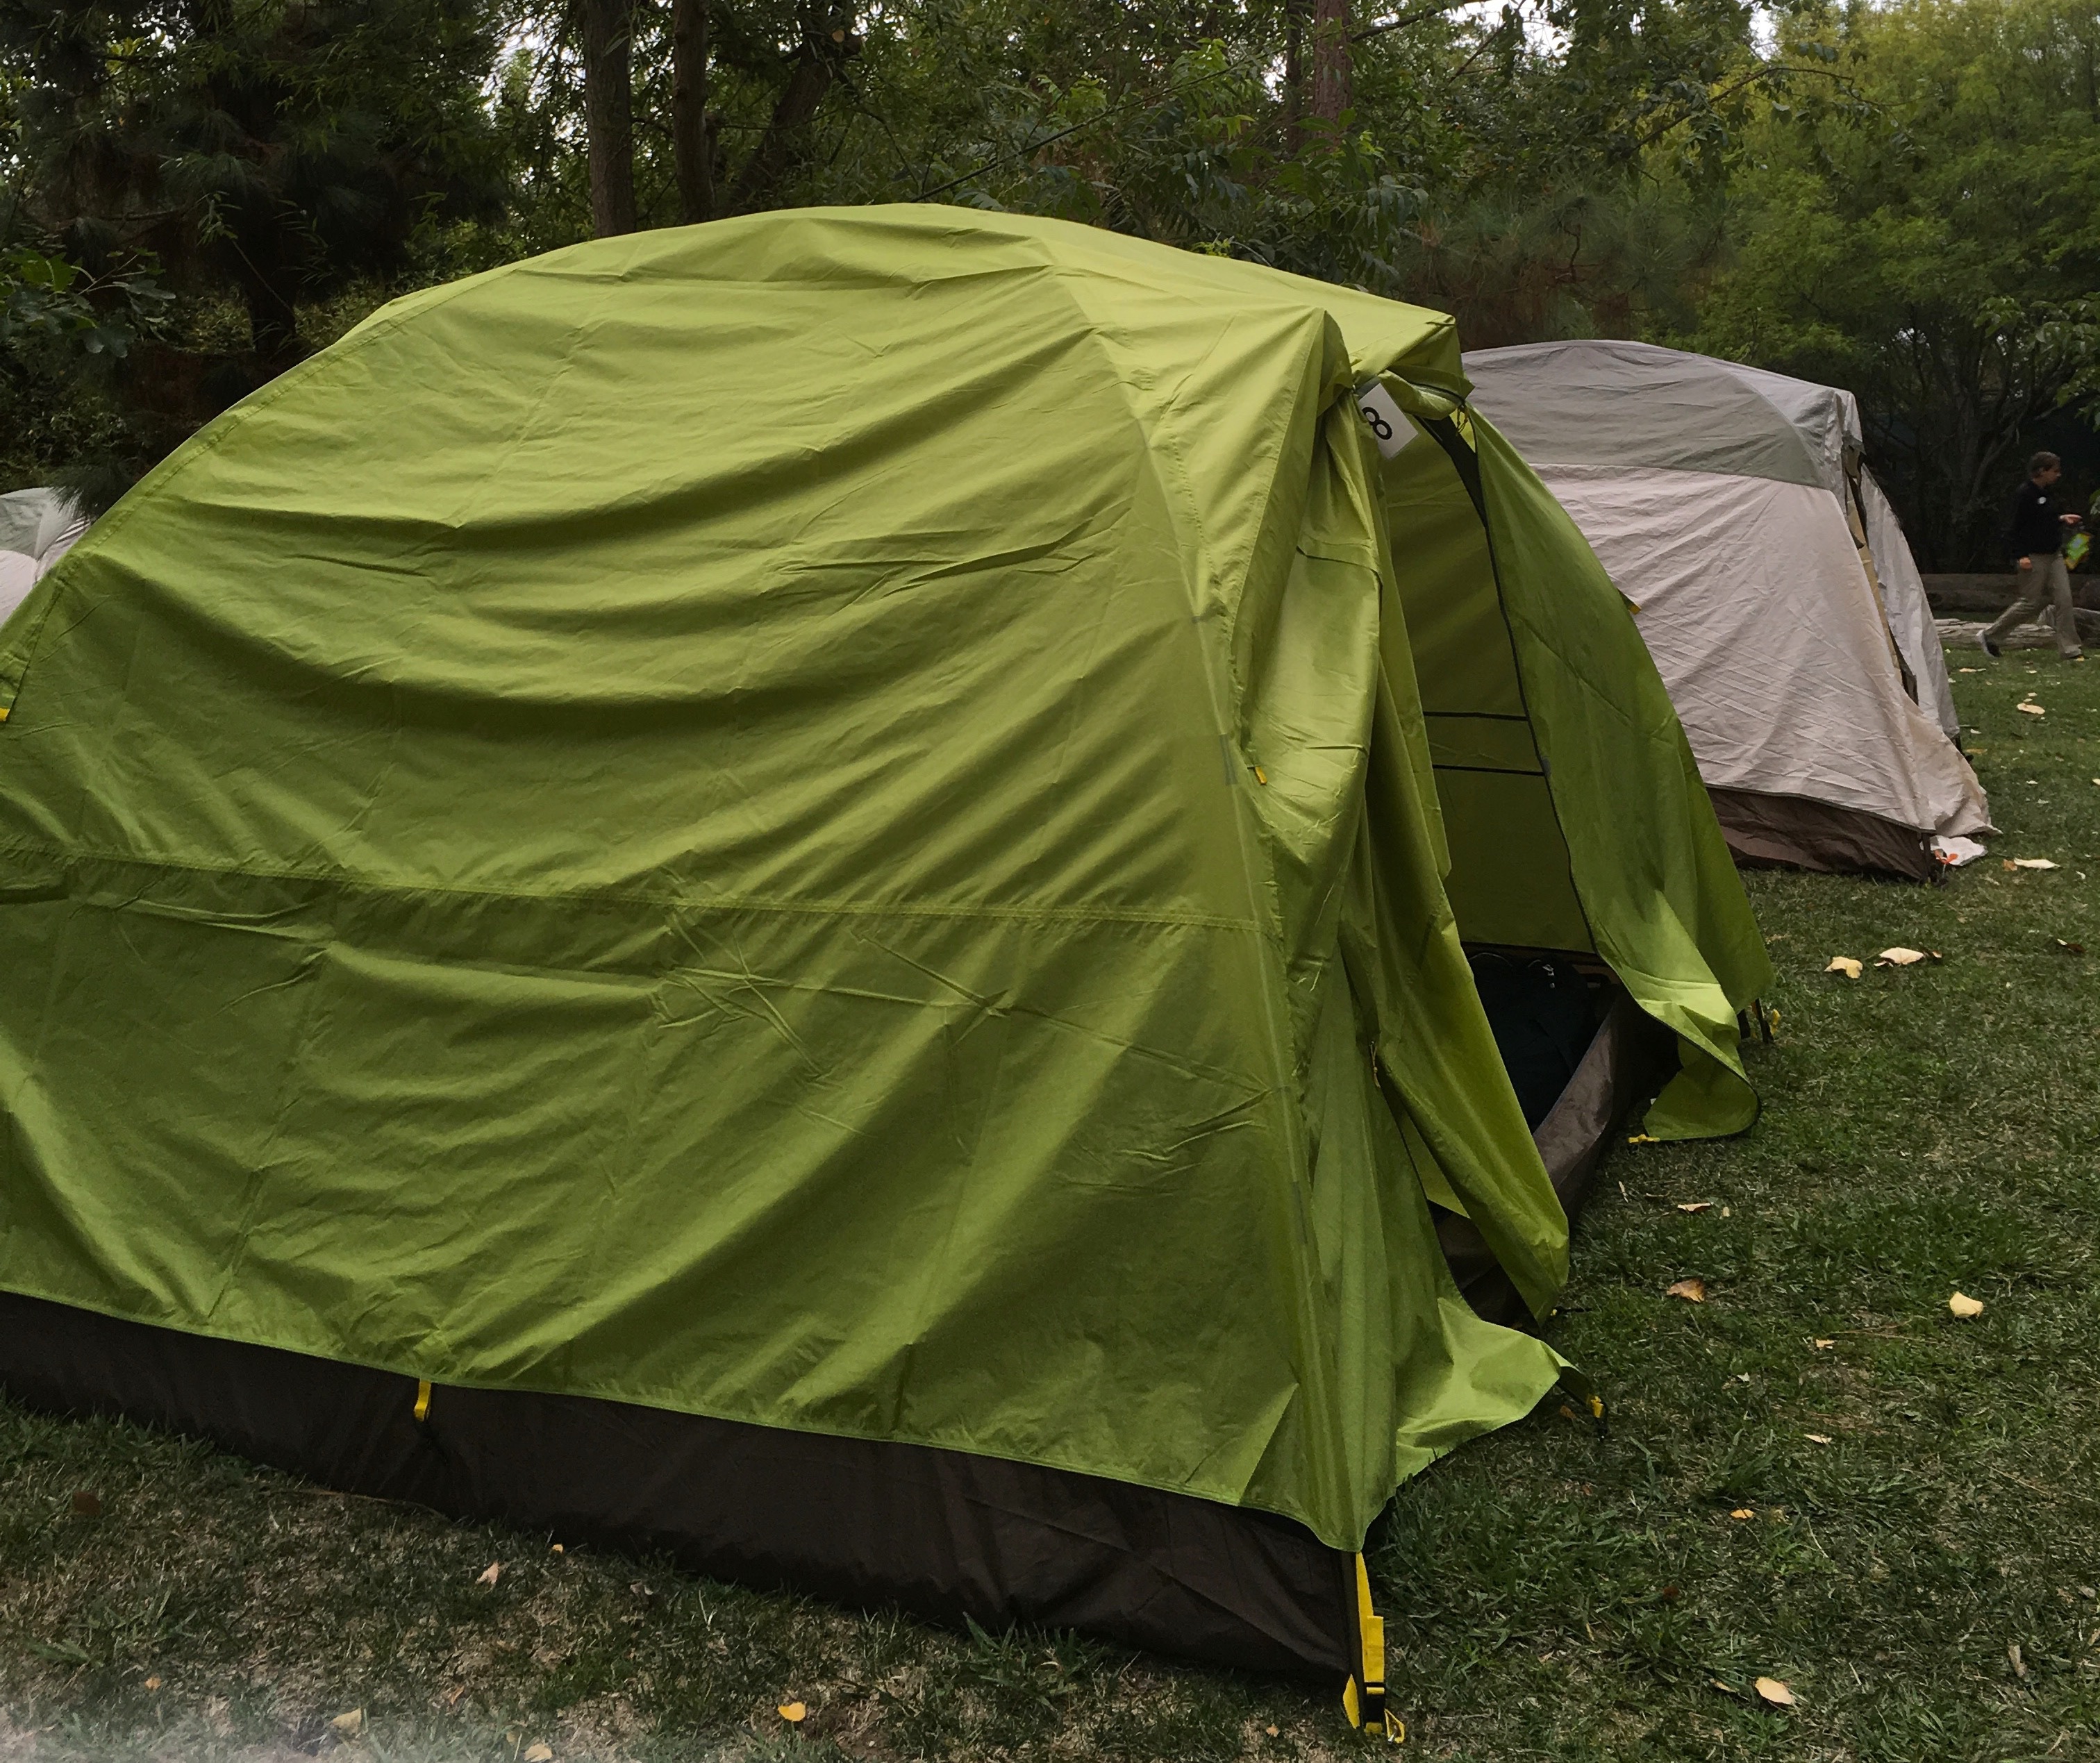 Tents at the San Diego Zoo's Camp Timbuktu